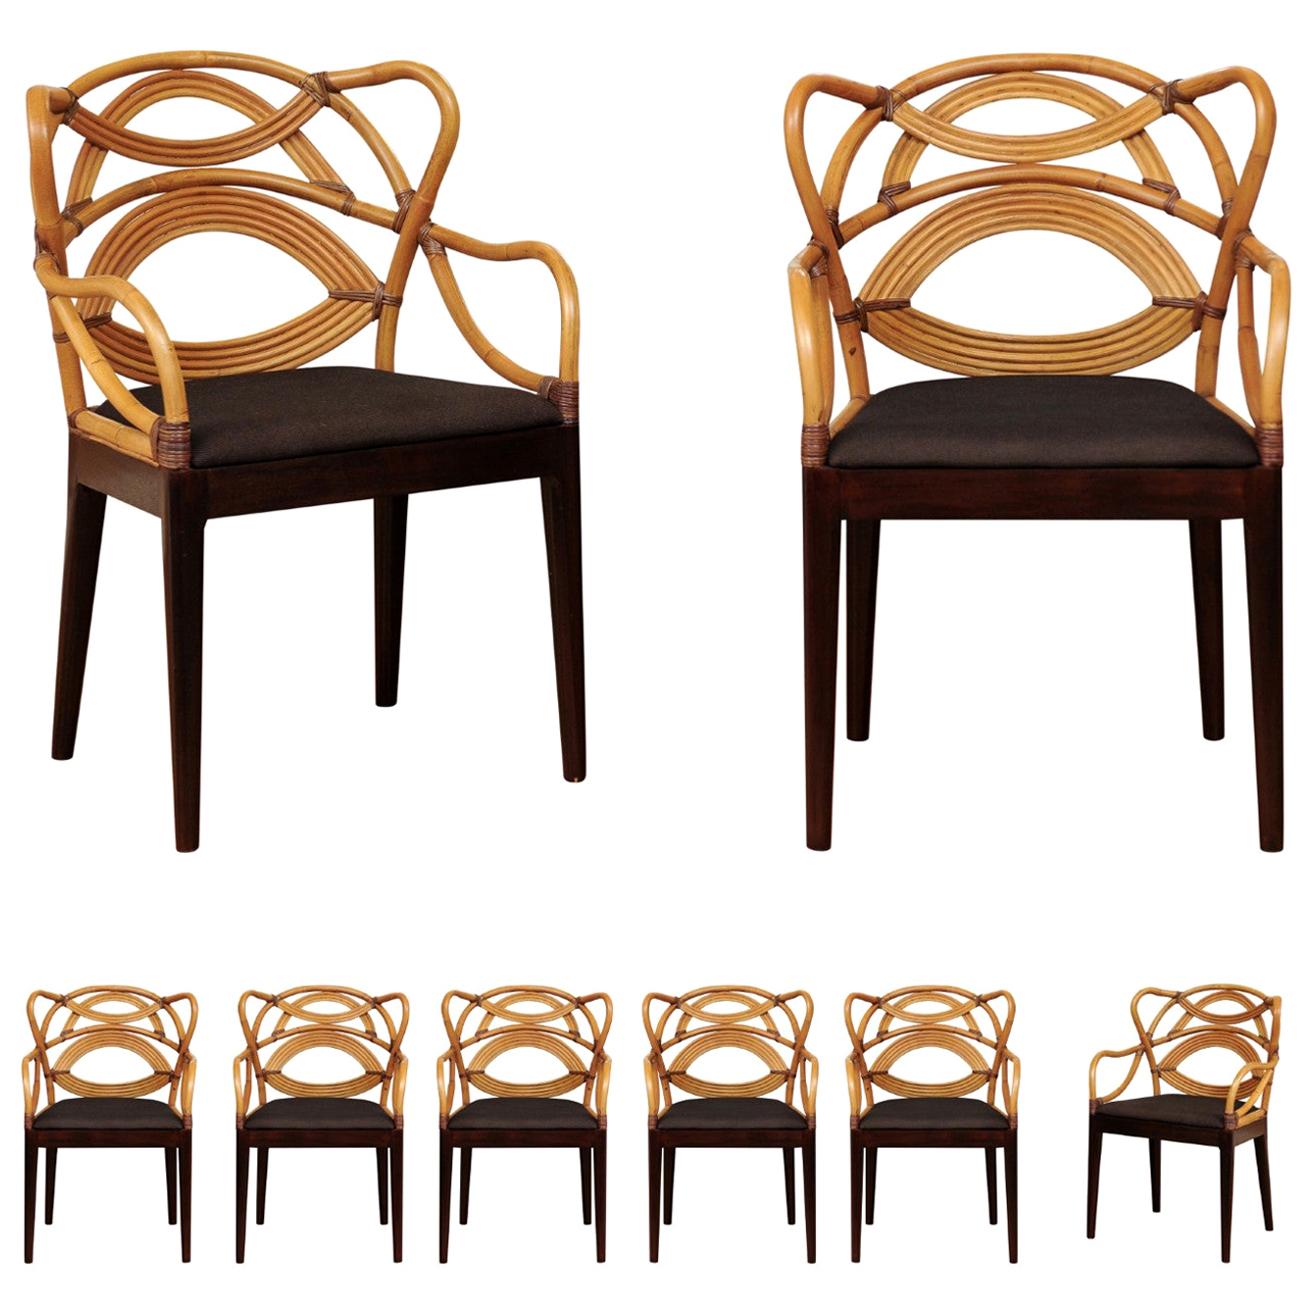 These magnificent dining chairs are shipped as professionally photographed and described in the listing narrative, meticulously professionally restored and installation ready. Expert custom upholstery service is available.

An incredible